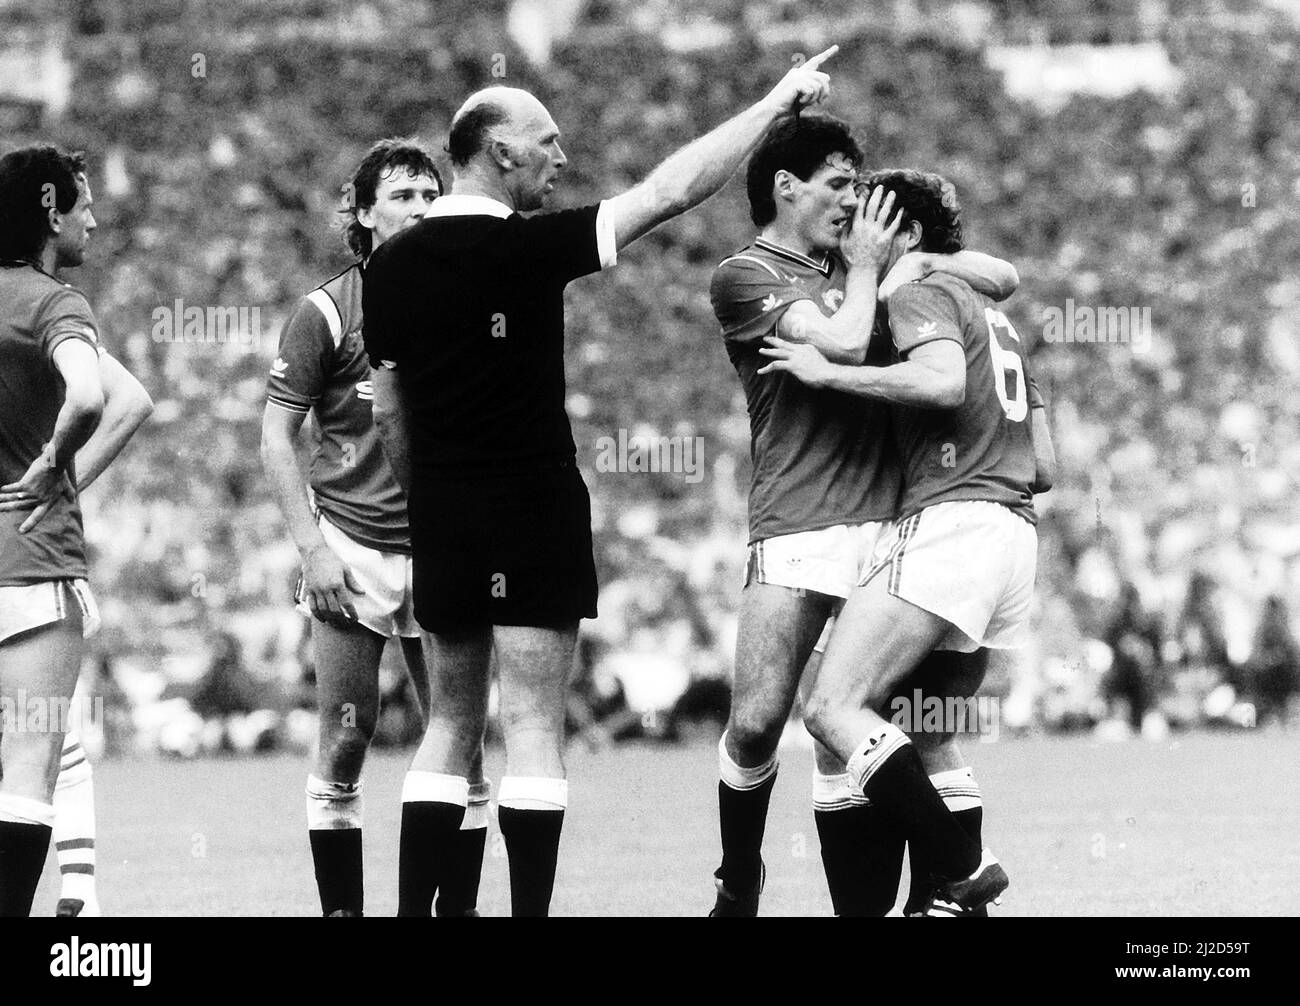 Manchester United v Everton FA Cup Final at Wembley Stadium 18th May 1985. Kevin Moran of Manchester United is sent off May 1985 by referee Peter Willis in the 1985 FA Cup Final at Wembley as Frank Stapleton tries to console Kevin Moran Moran was the first player to be sent off in a FA  Cup Final   Final score: Manchester United 0-1 Everton Stock Photo